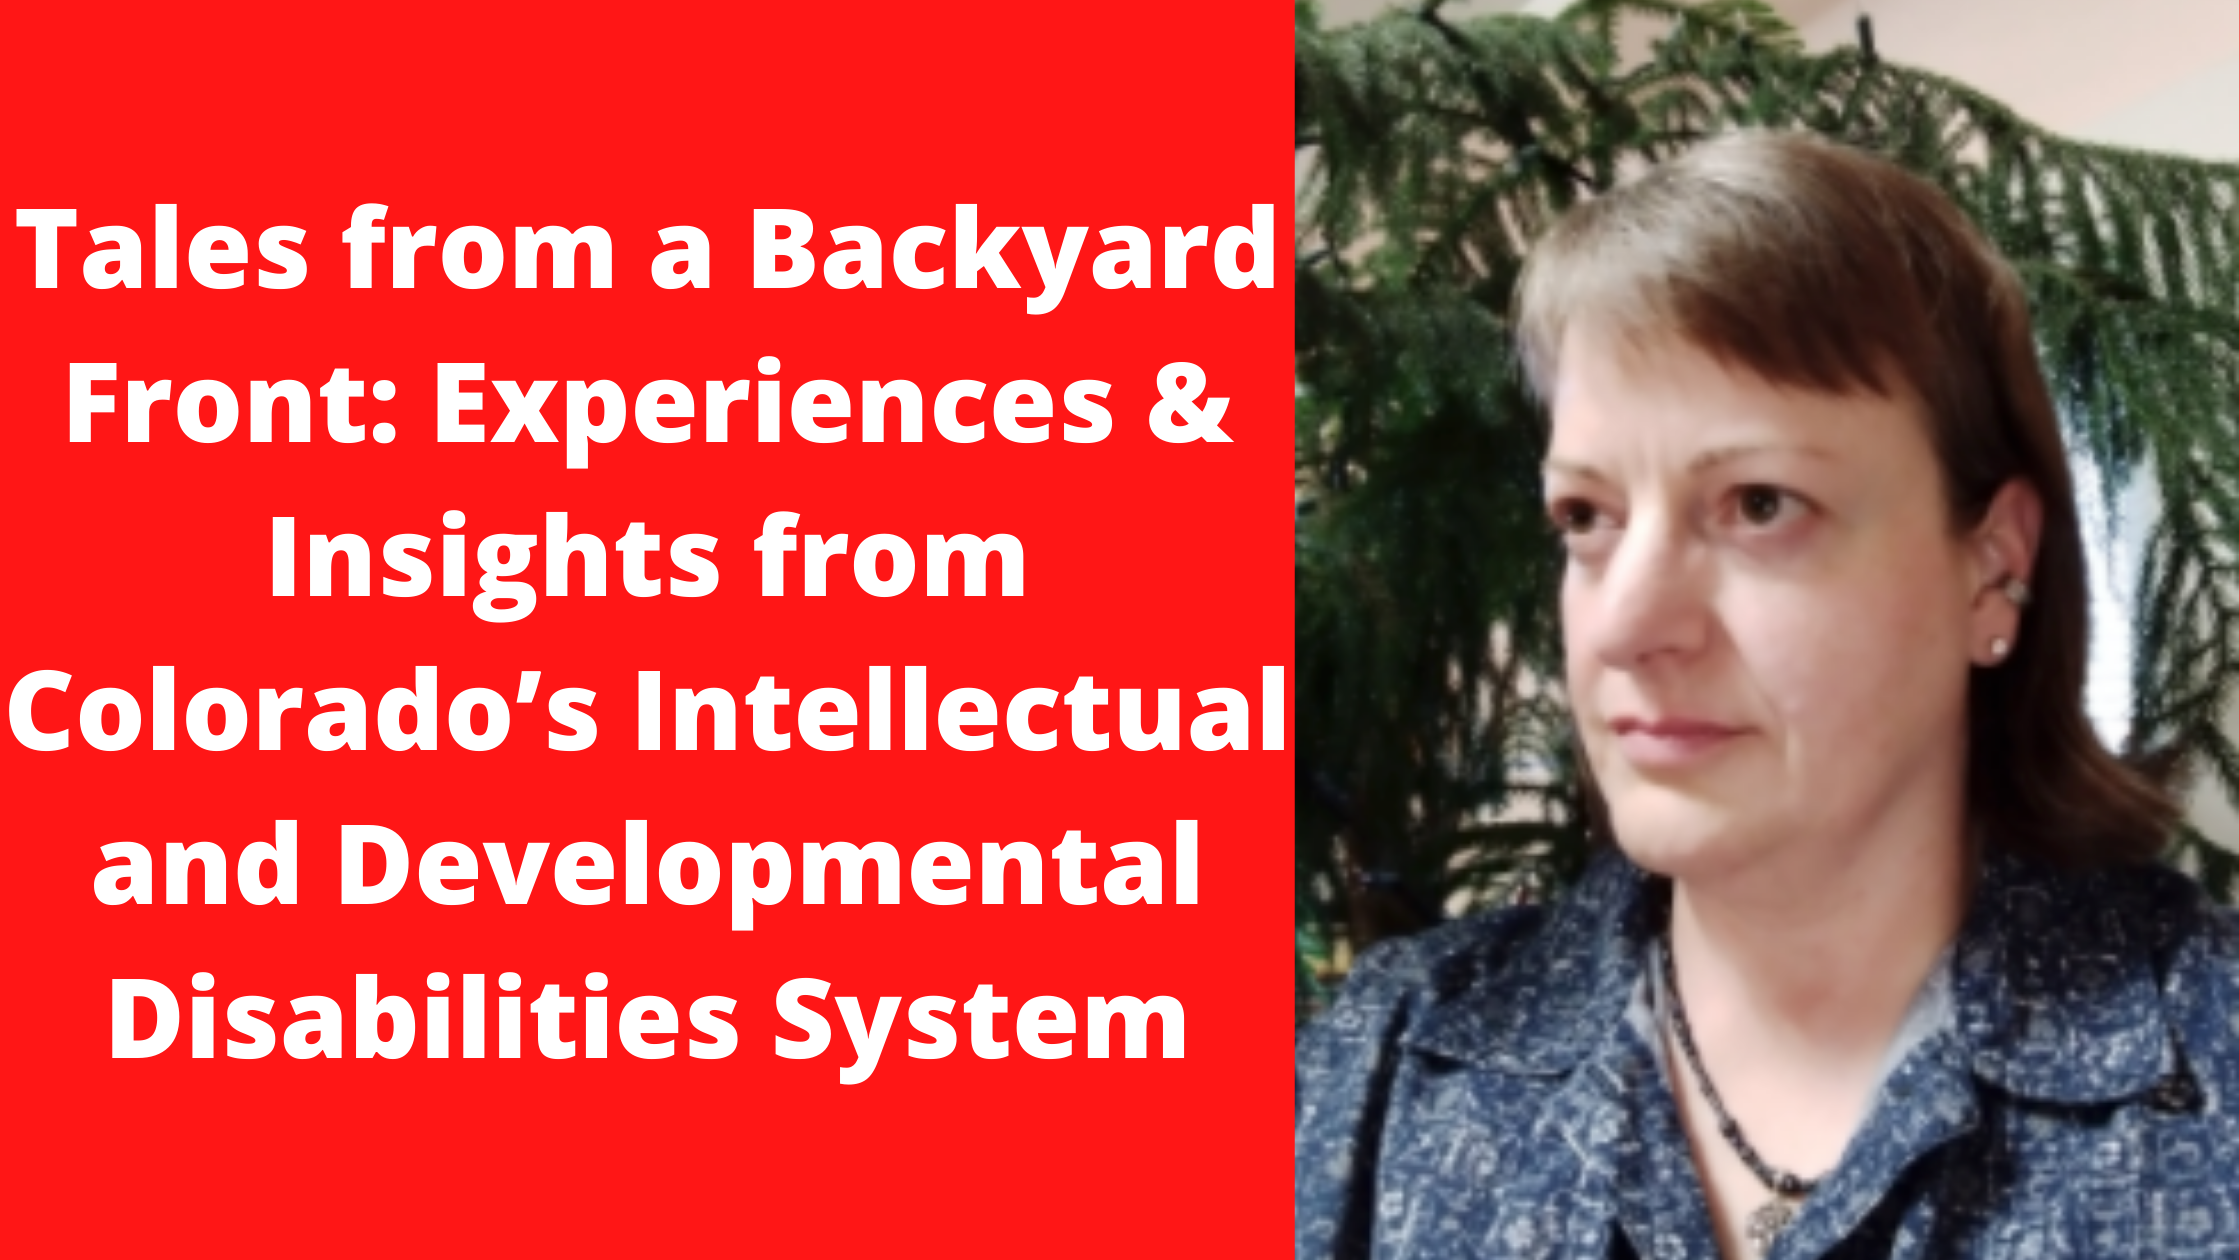 Tales from a Backyard Front: Experiences & Insights from Colorado’s Intellectual and Developmental Disabilities System